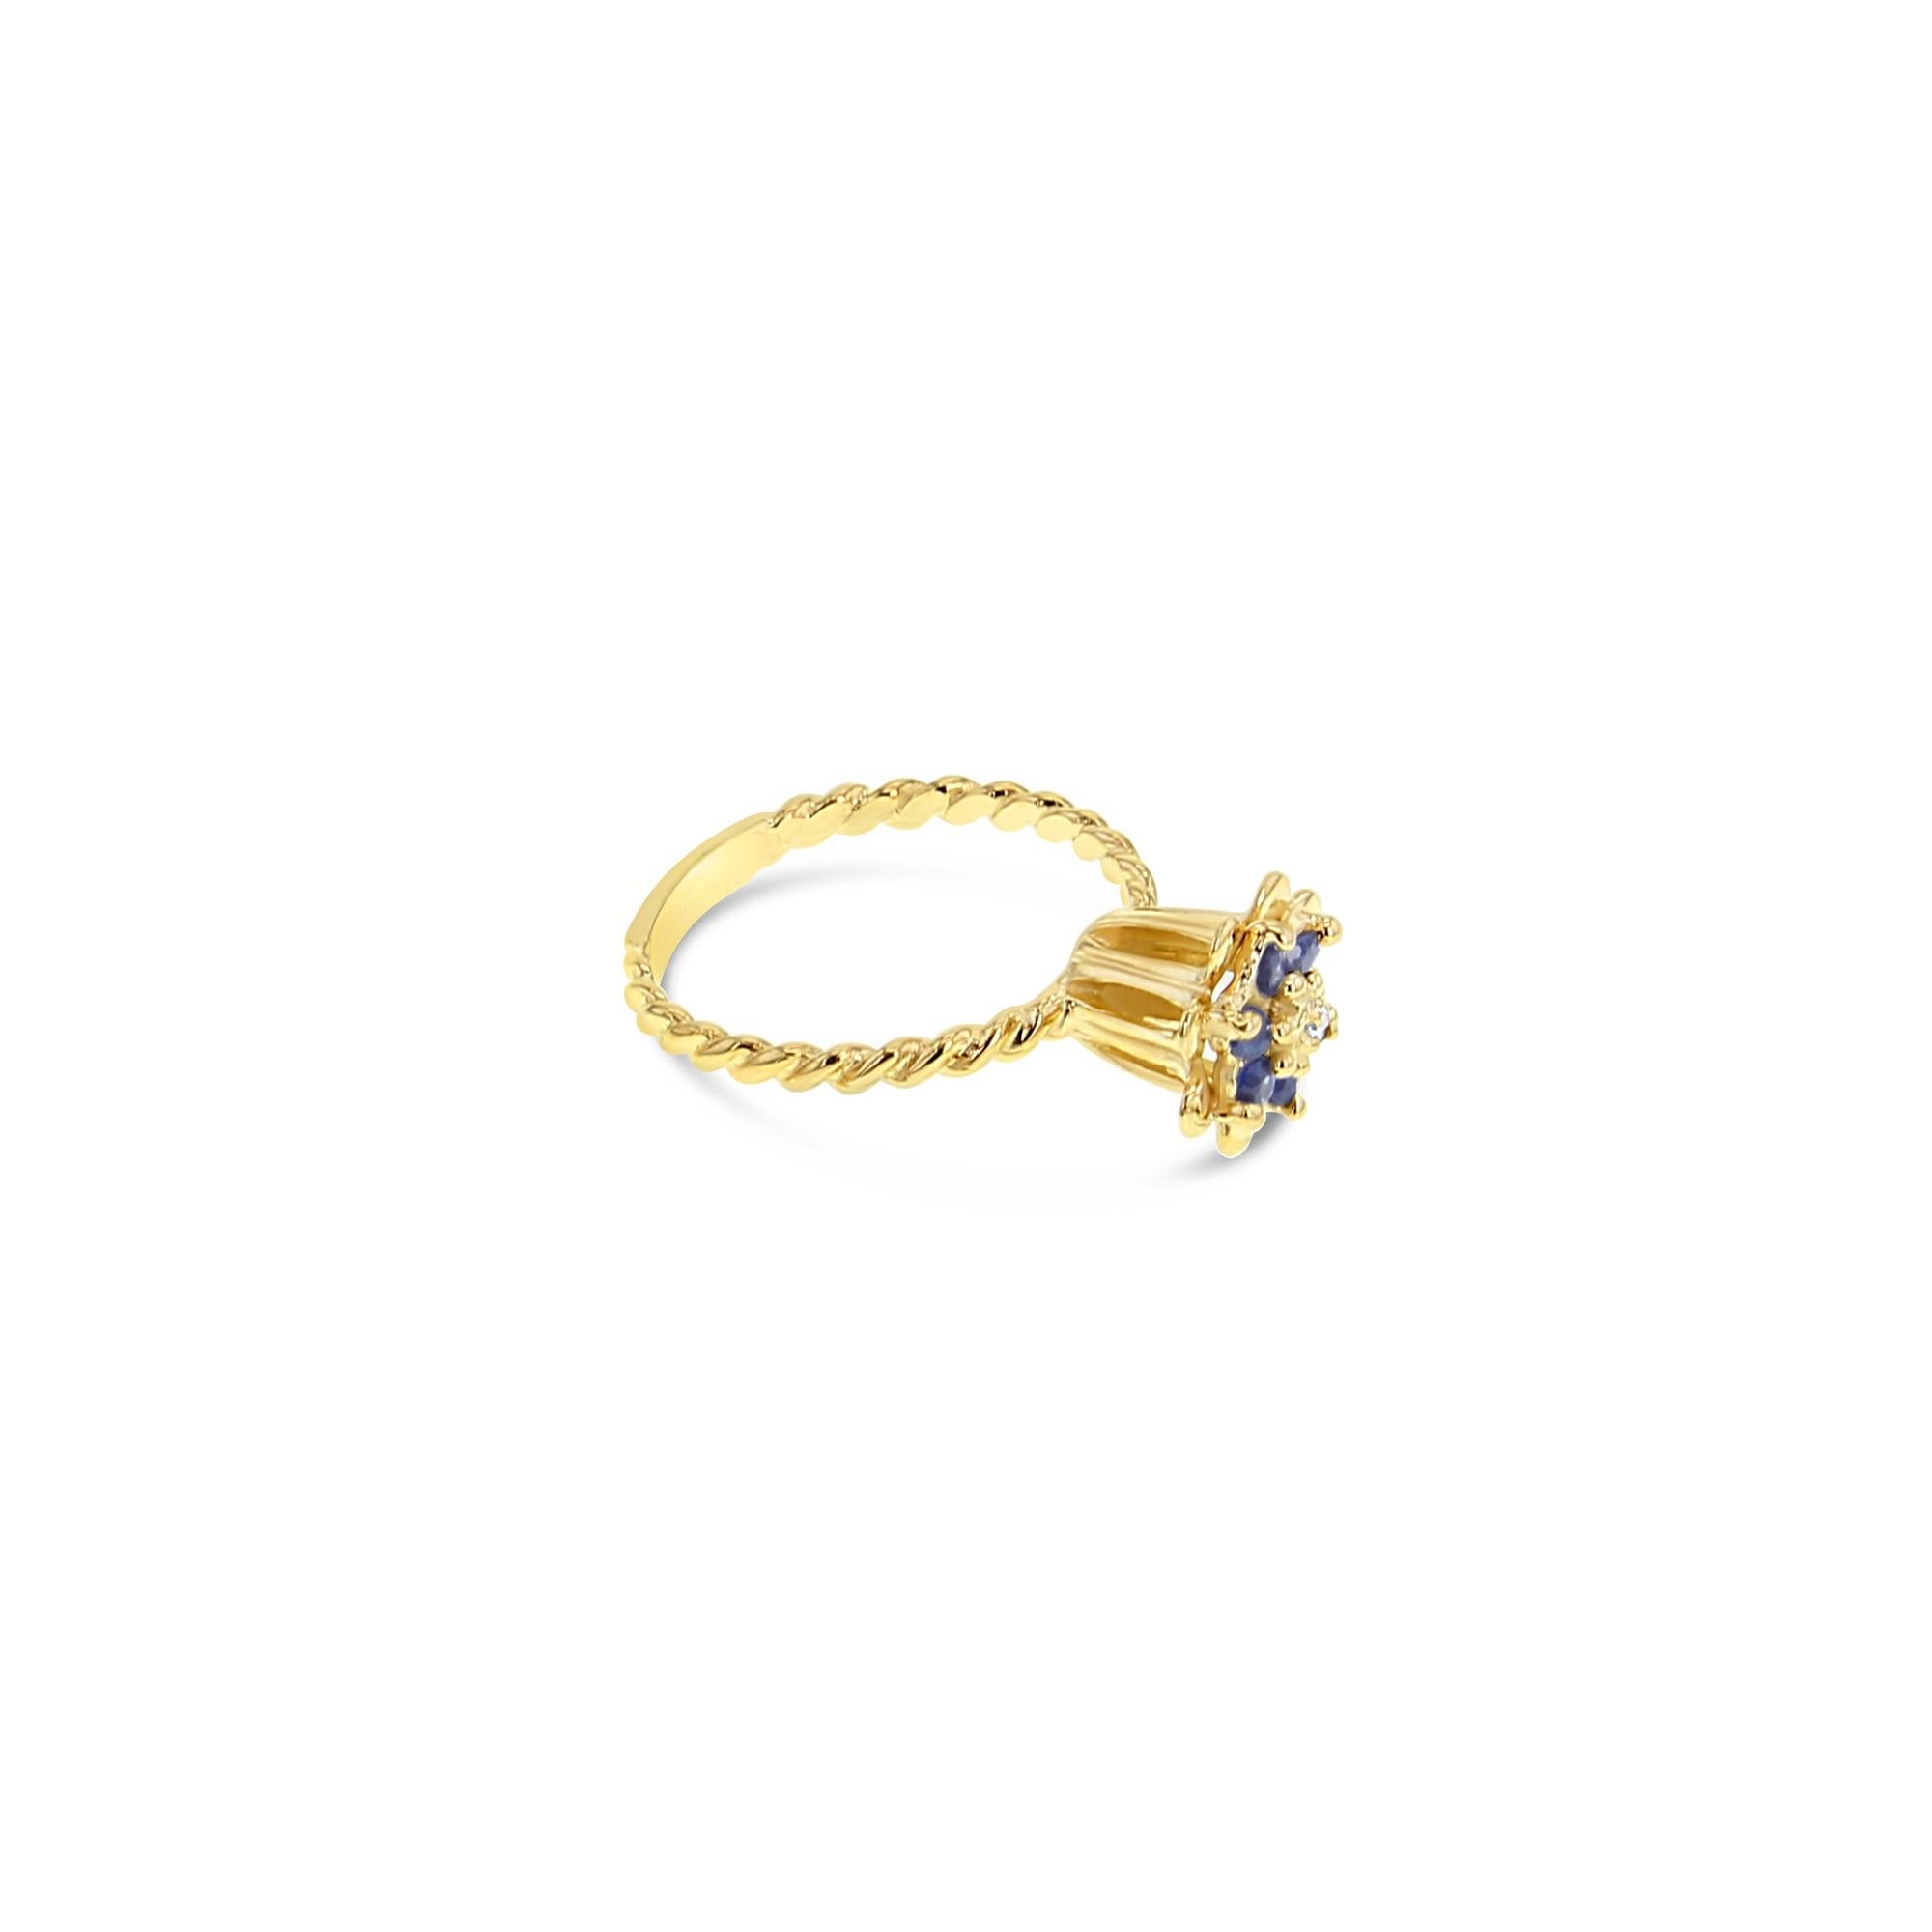 ♥ Product Summary ♥

Main Stone: Sapphire
Band Material:  14k Yellow Gold
Weight: 2 grams
Bulb Height: 9mm
**If there is a certain size not listed please message me 